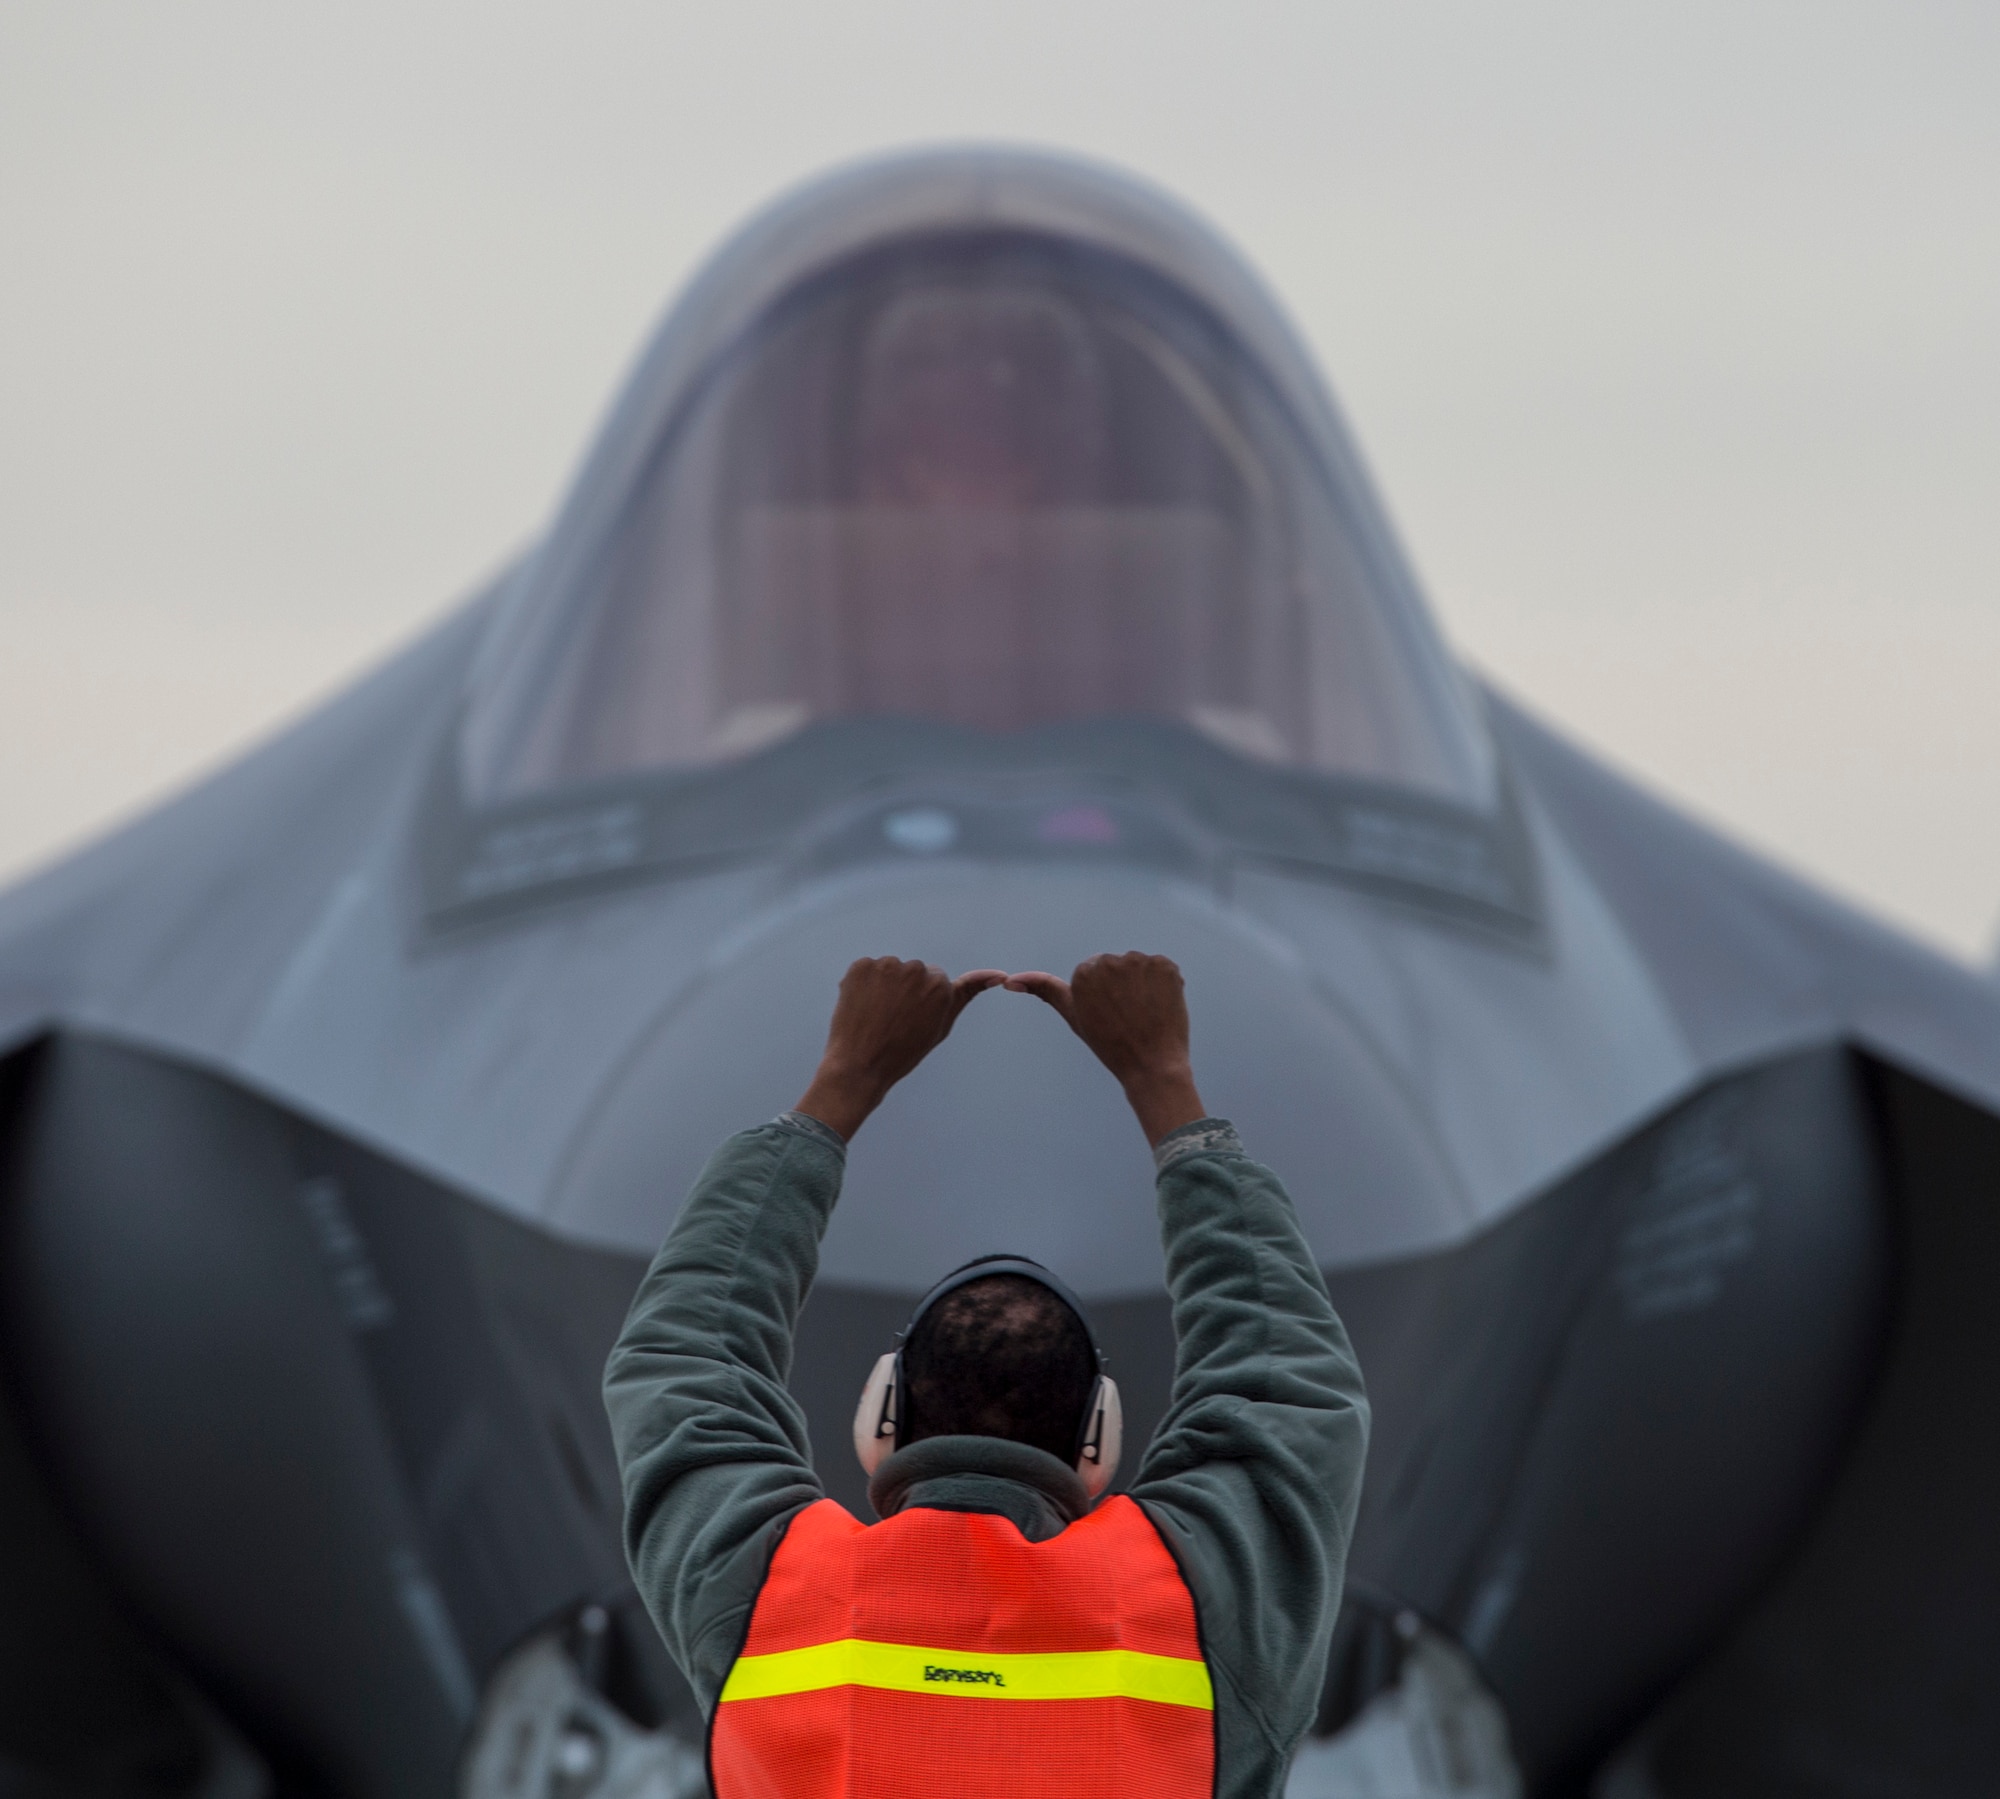 Staff Sgt. Quincy Robinson, a weapons load crew member from the 31st Test and Evaluation Squadron, signals to chock the tires of an F-35 Lightning fighter jet from the 53rd TES before arming and takeoff from Mountain Home Air Force Base, Idaho, Feb. 17, 2016. (U.S. Air Force photo/Tech Sgt. Brian Ferguson)